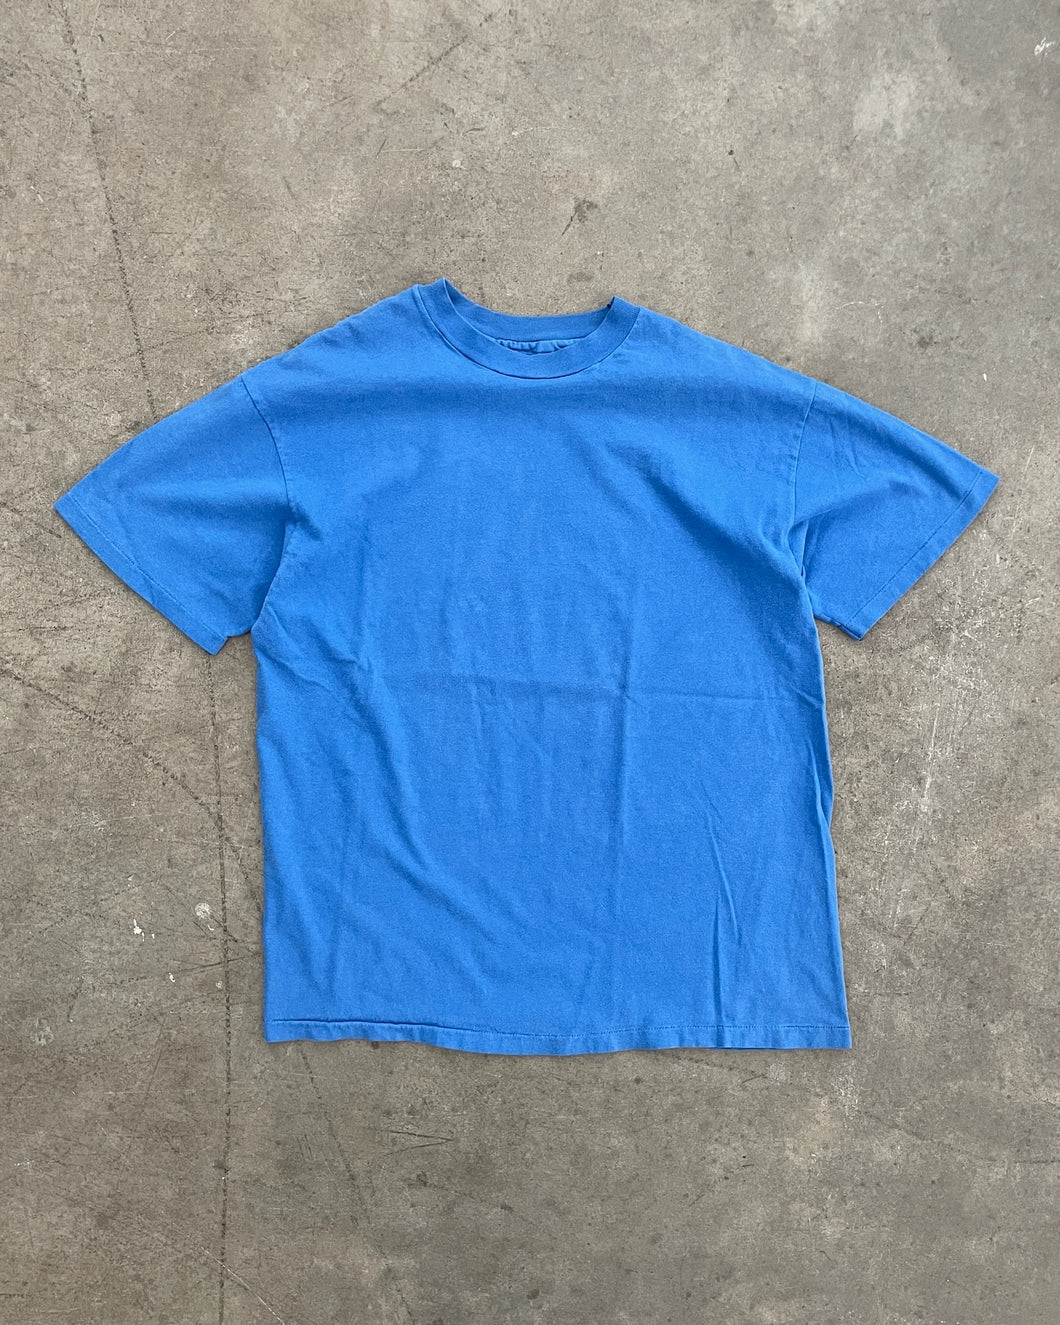 FADED BLUE HANES SINGLE STITCHED TEE - 1990S